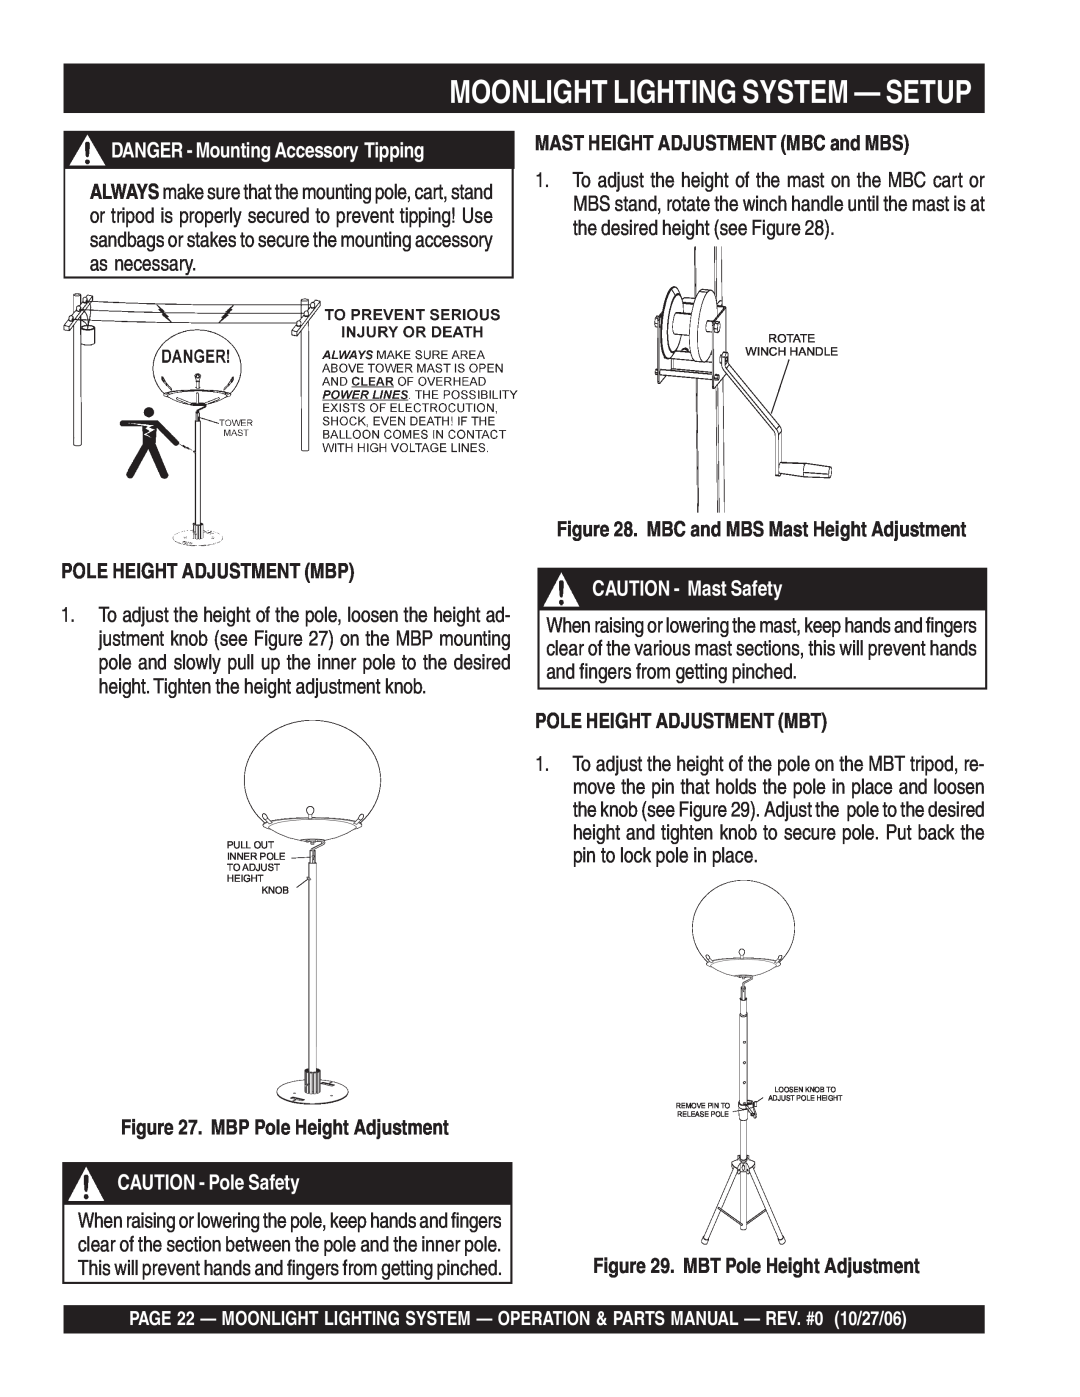 Multiquip MB150 Moonlight Lighting System - Setup, DANGER - Mounting Accessory Tipping, MAST HEIGHT ADJUSTMENT MBC and MBS 